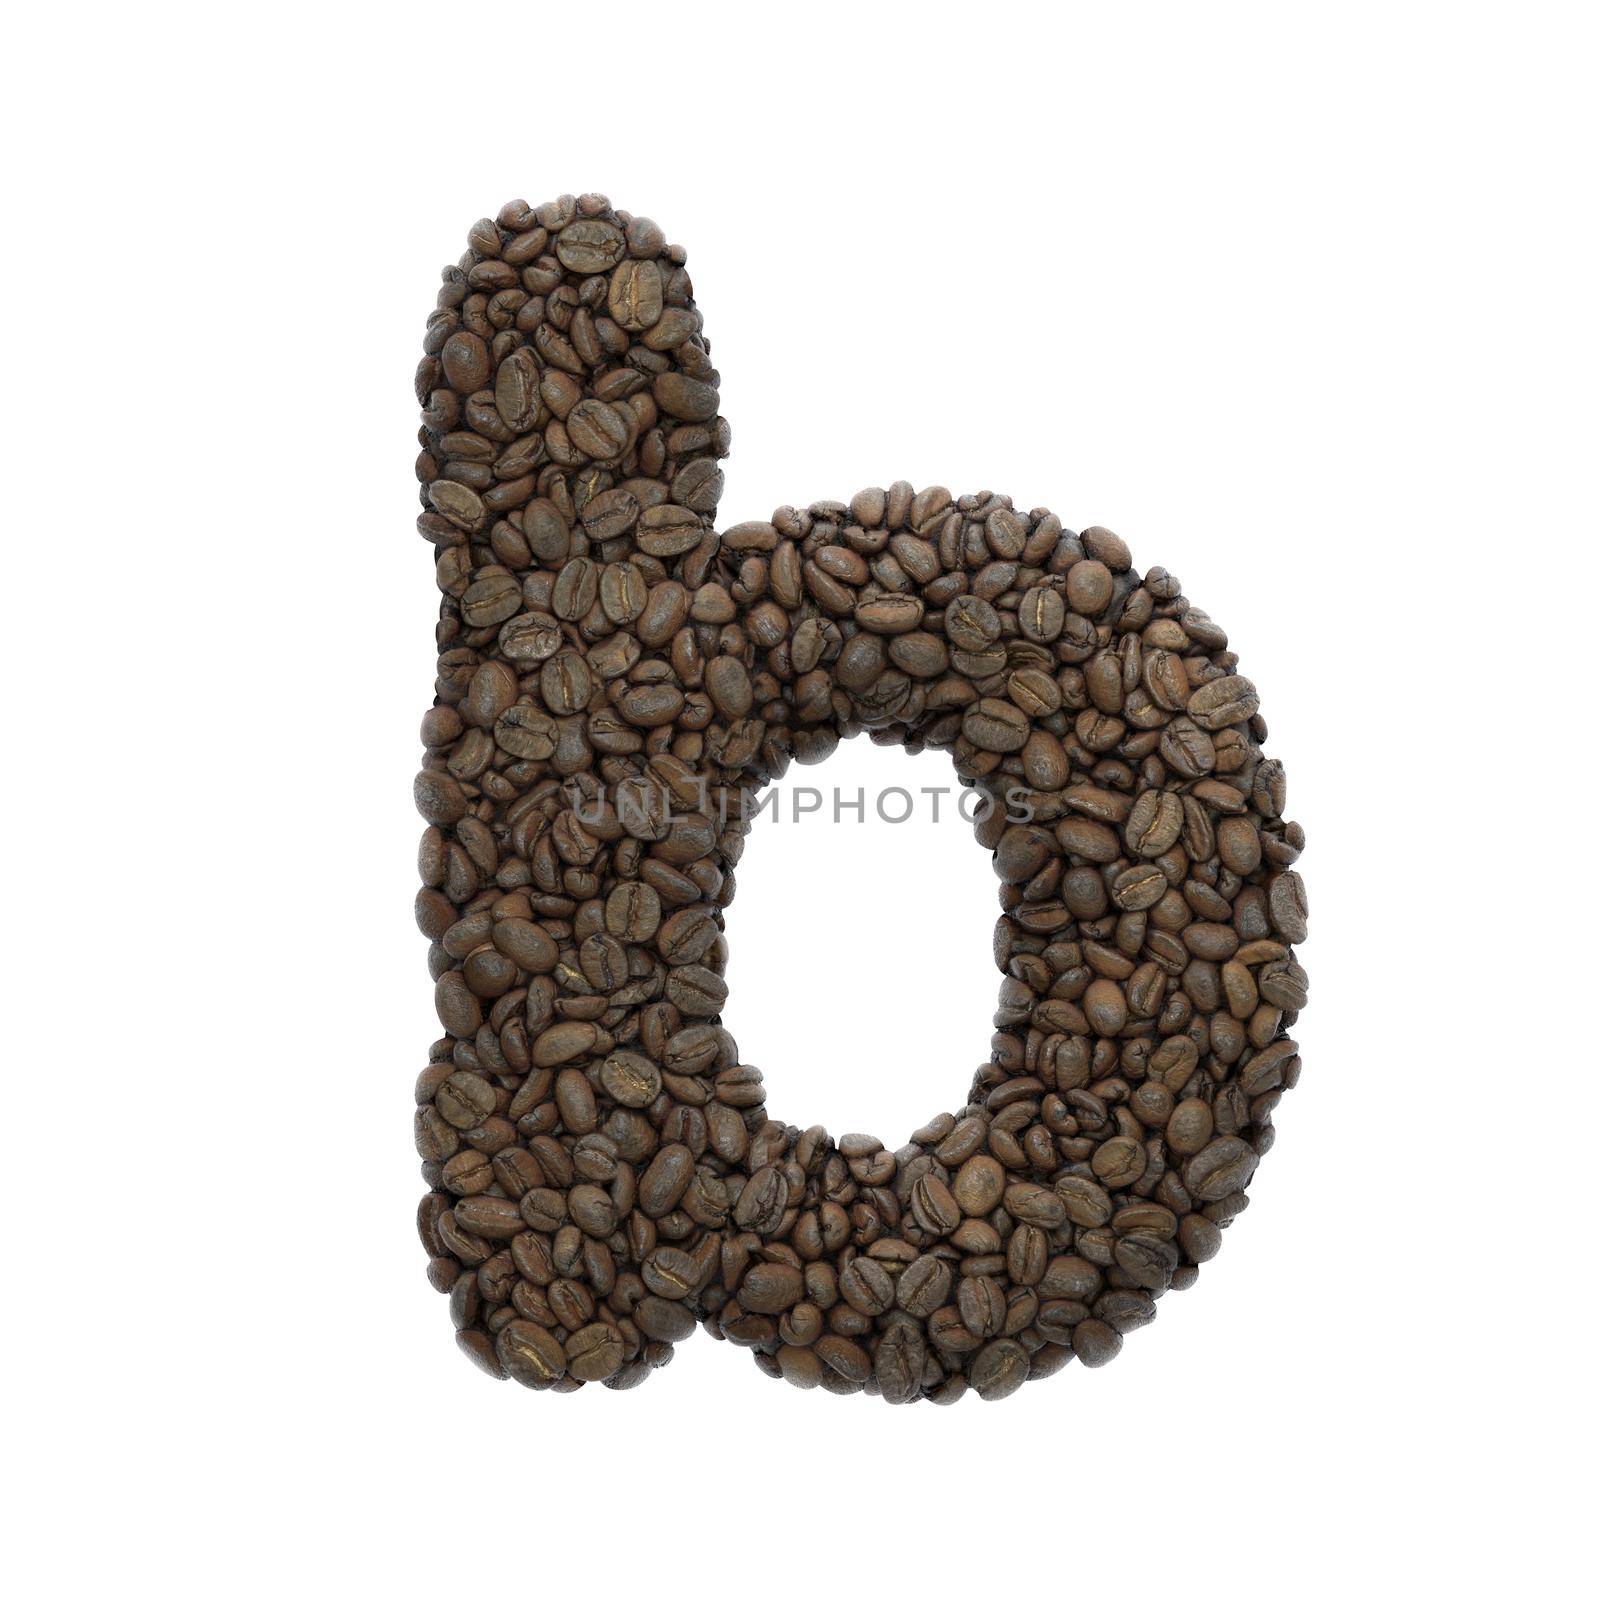 Coffee letter B - Lower-case 3d roasted beans font - Suitable for Coffee, energy or insomnia related subjects by chrisroll